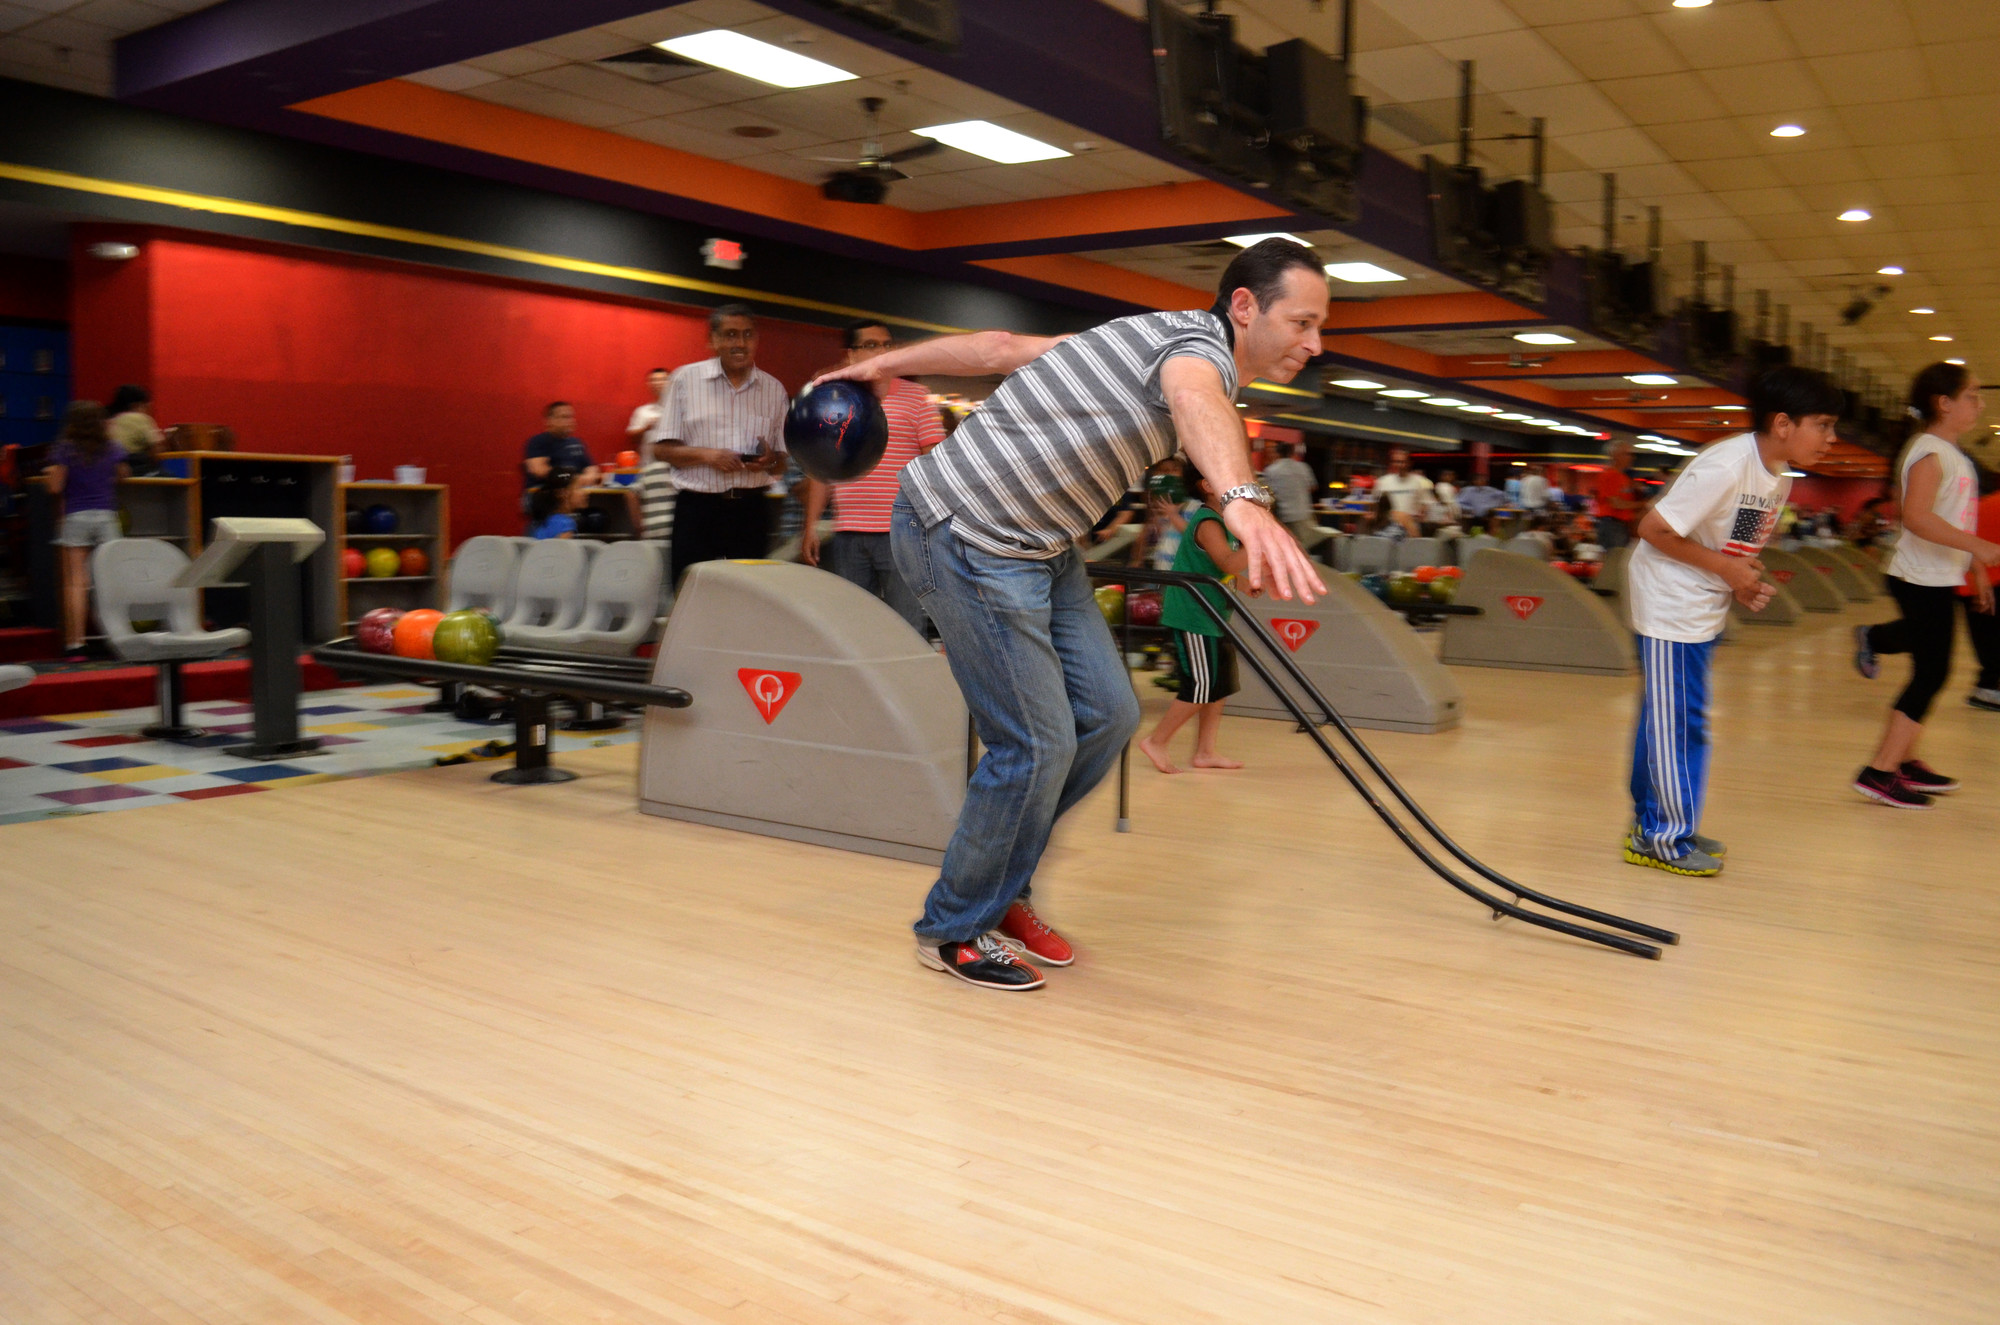 Adam Ashe lined up his shot at the Barnum Woods PTA’s Father’s Day bowling night.